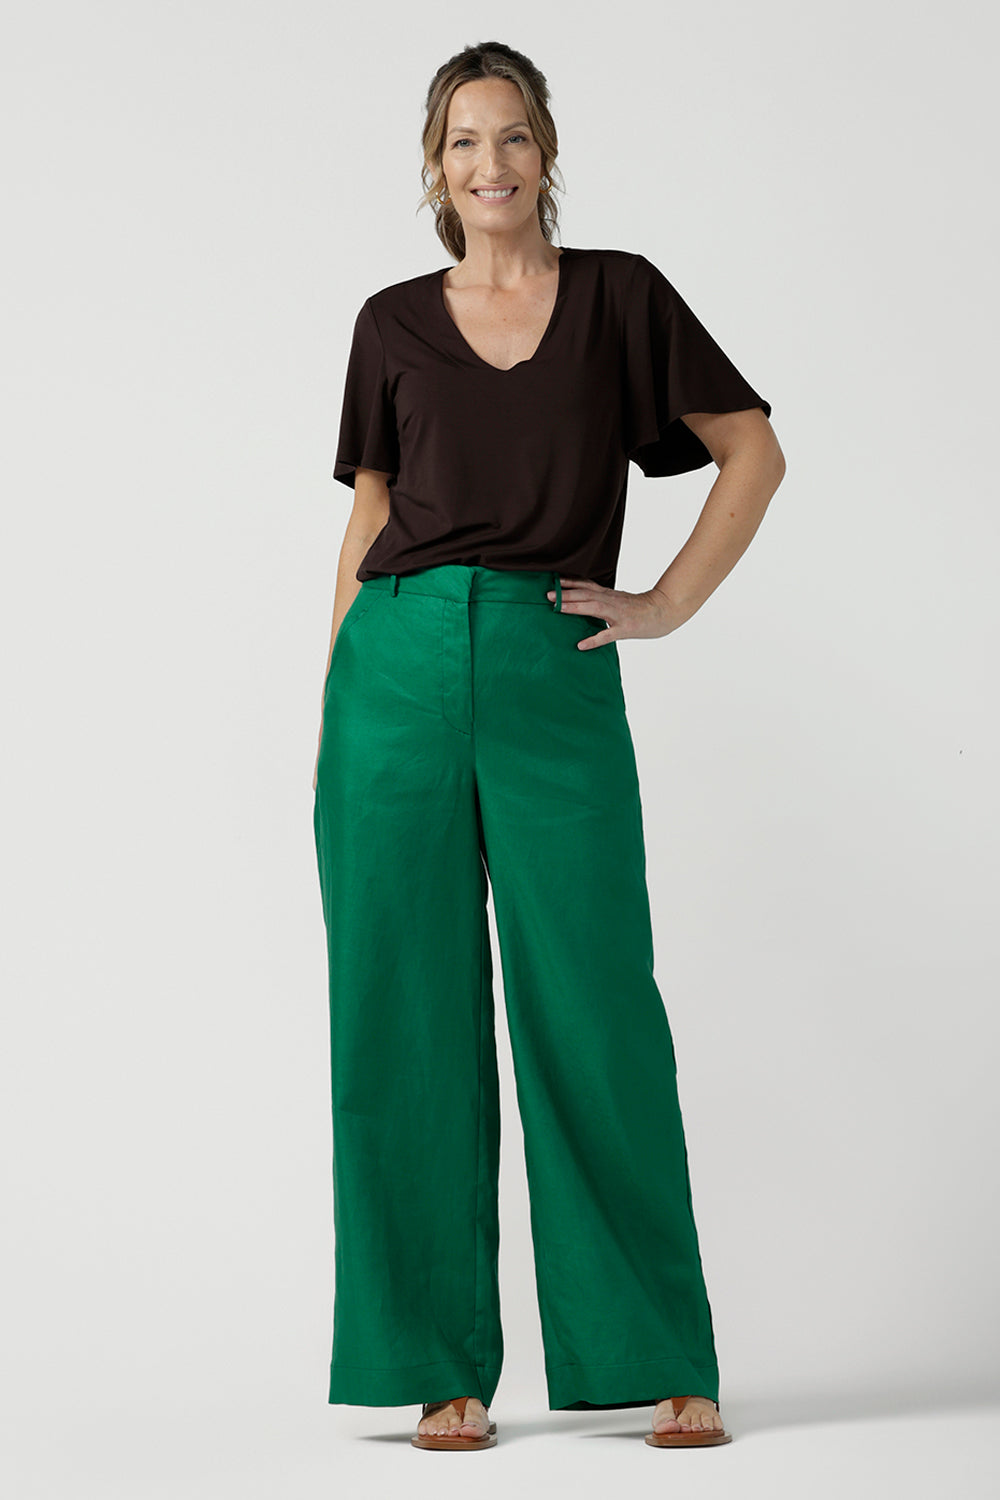 A size 12 woman wears a tailored linen pant in 100% linen. Breathable linen fabrication in a beautiful emerald green colour. The perfect workwear pants with pockets that make great summer pants. Size inclusive fashion designed and made in Australia size 8 - 24. 